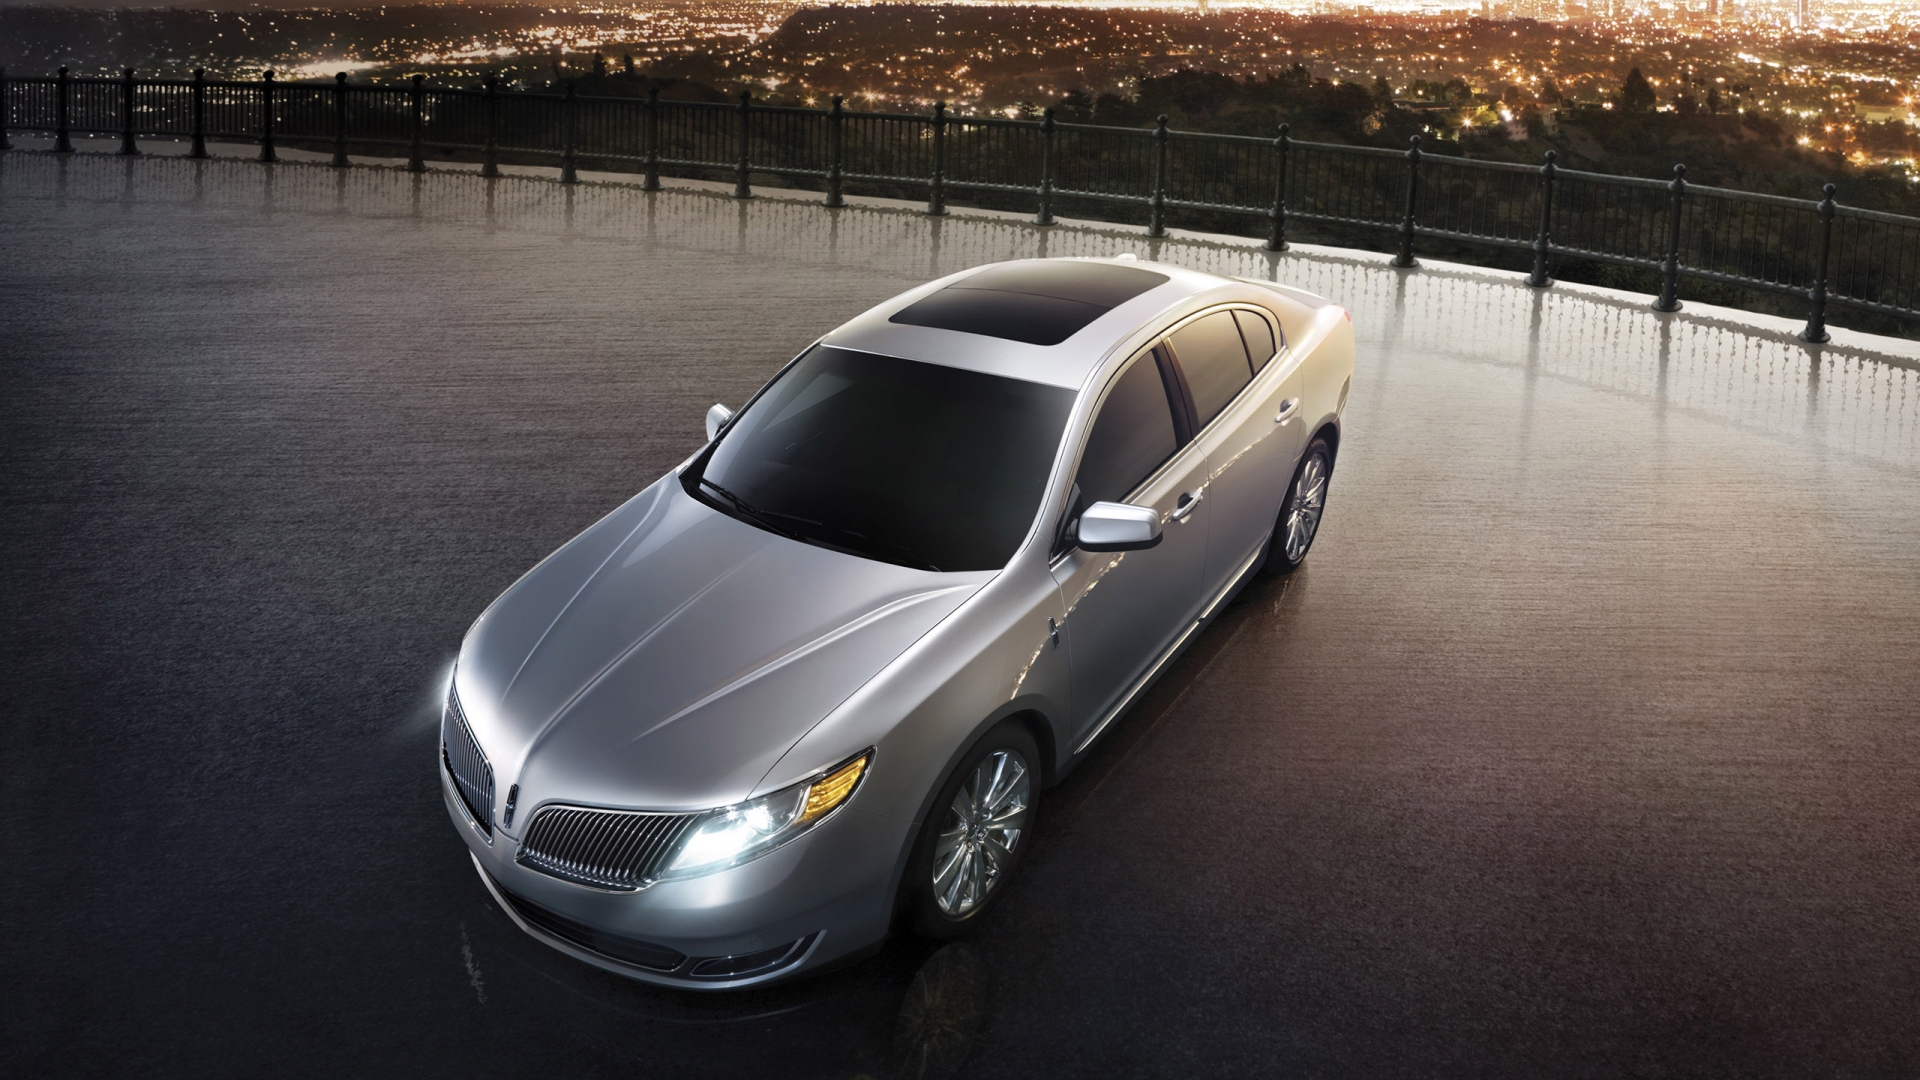 2013 Lincoln MKS for 1920 x 1080 HDTV 1080p resolution